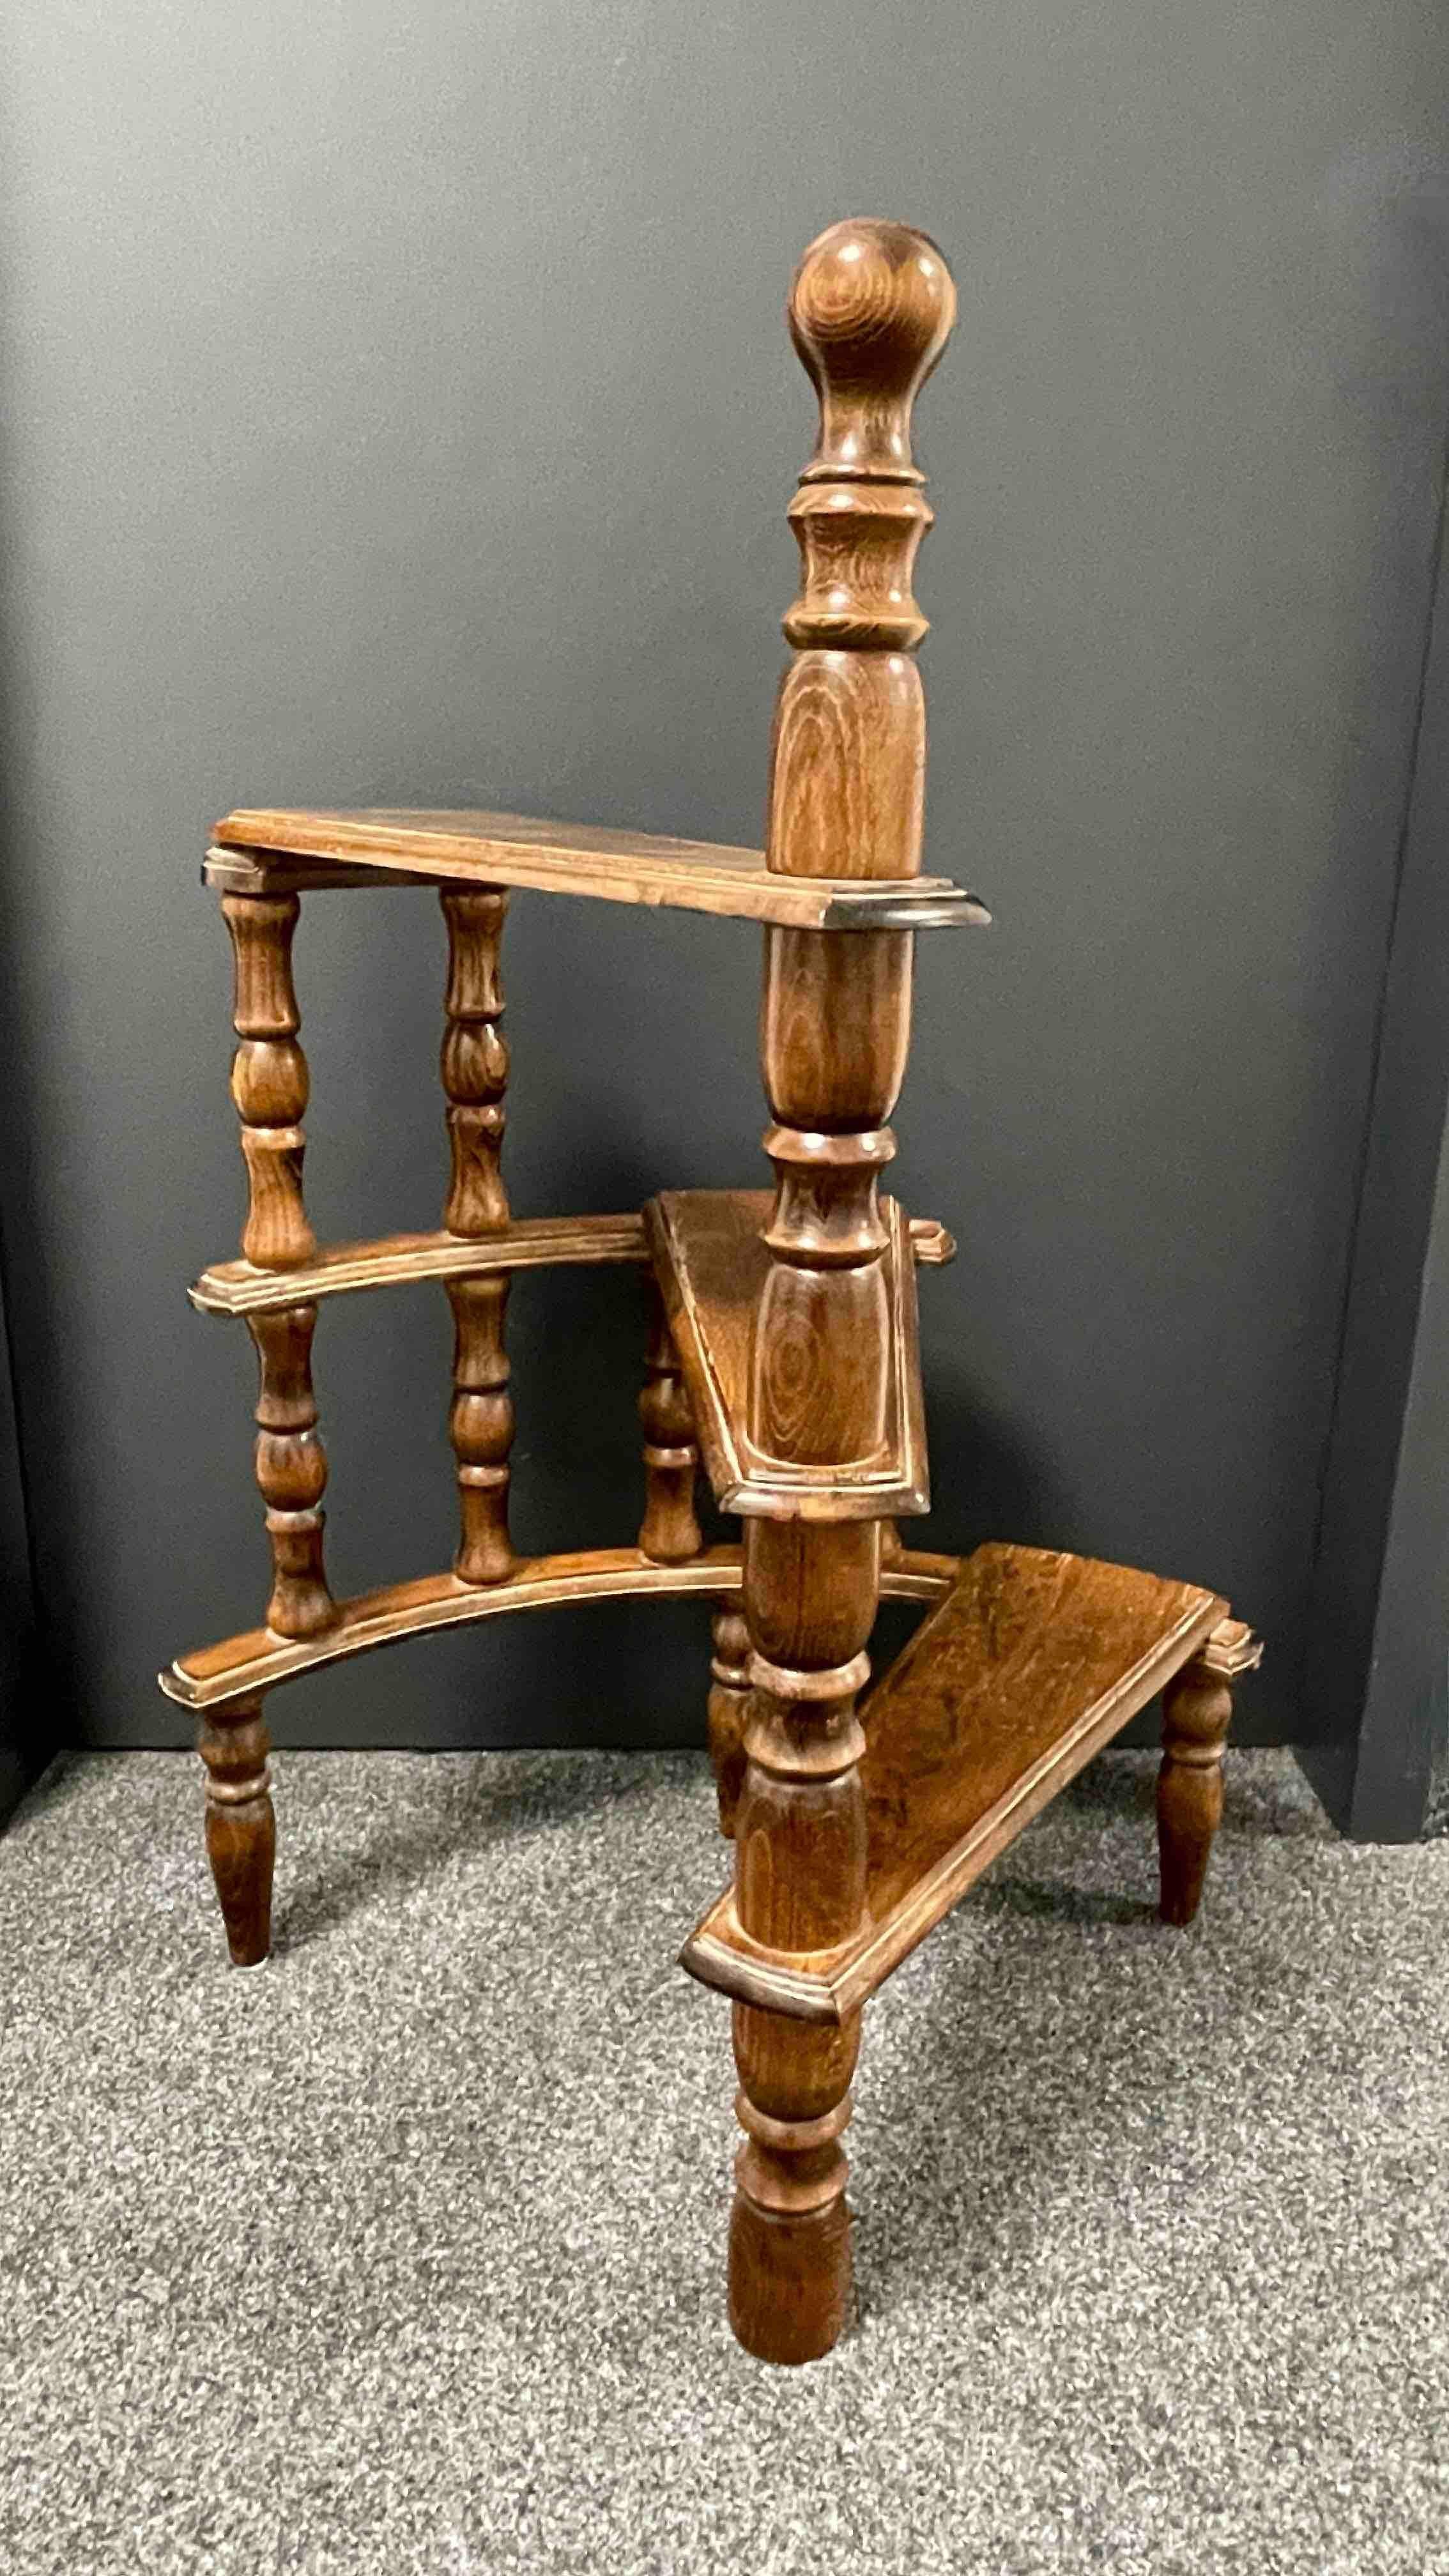 Hand-Carved Mid-20th Century German Carved Wood Spiral Step Library Ladder For Sale